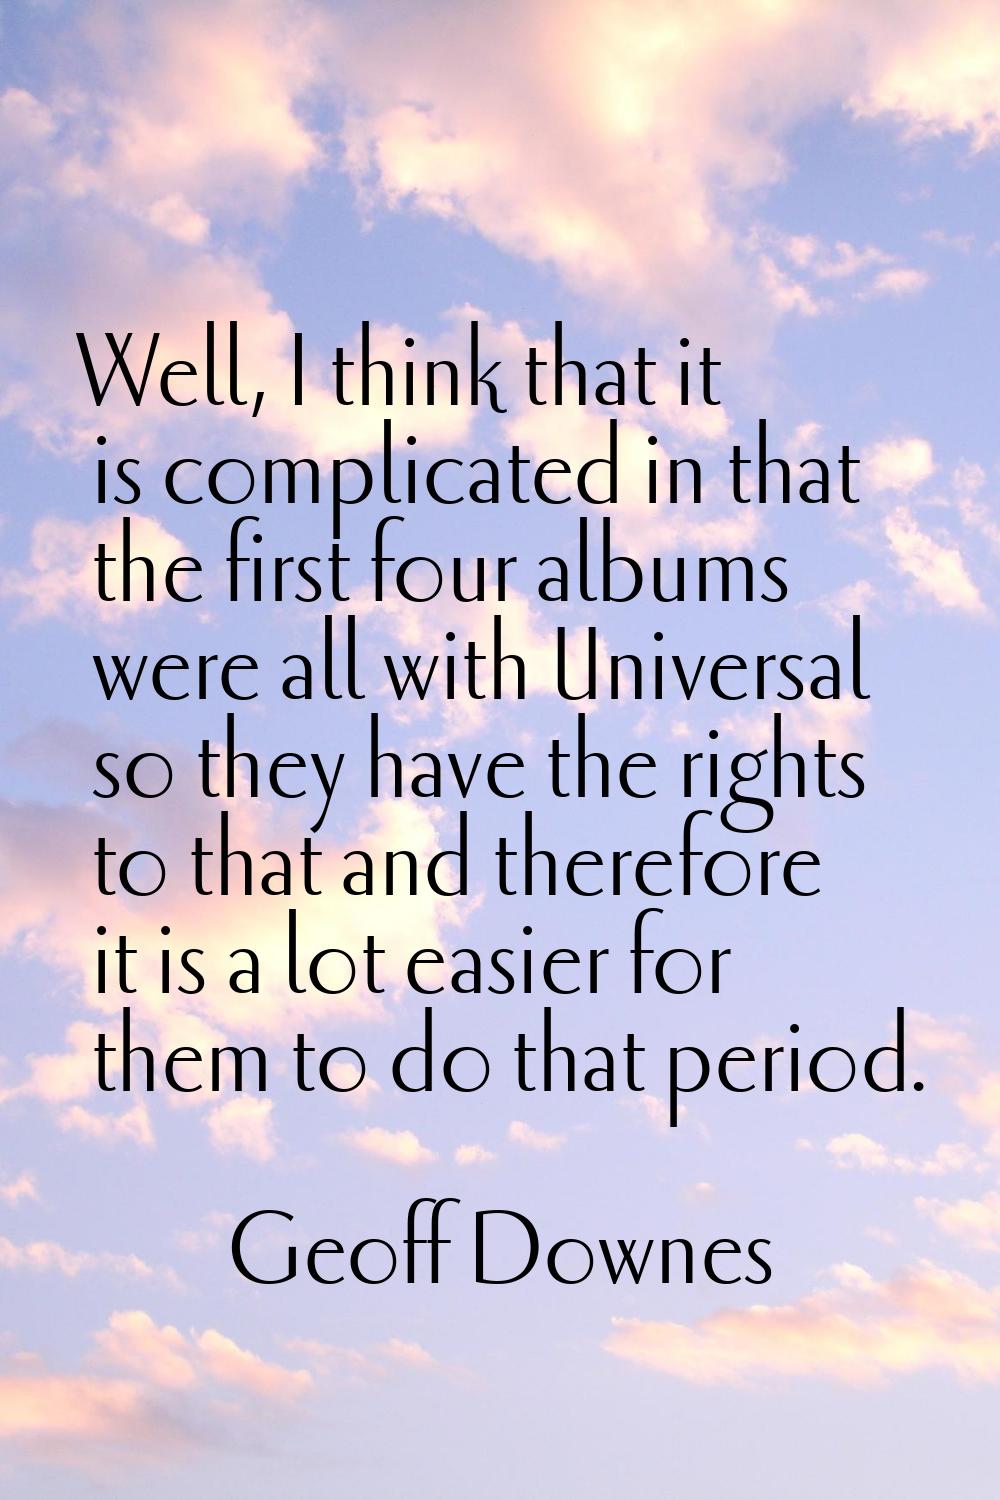 Well, I think that it is complicated in that the first four albums were all with Universal so they 